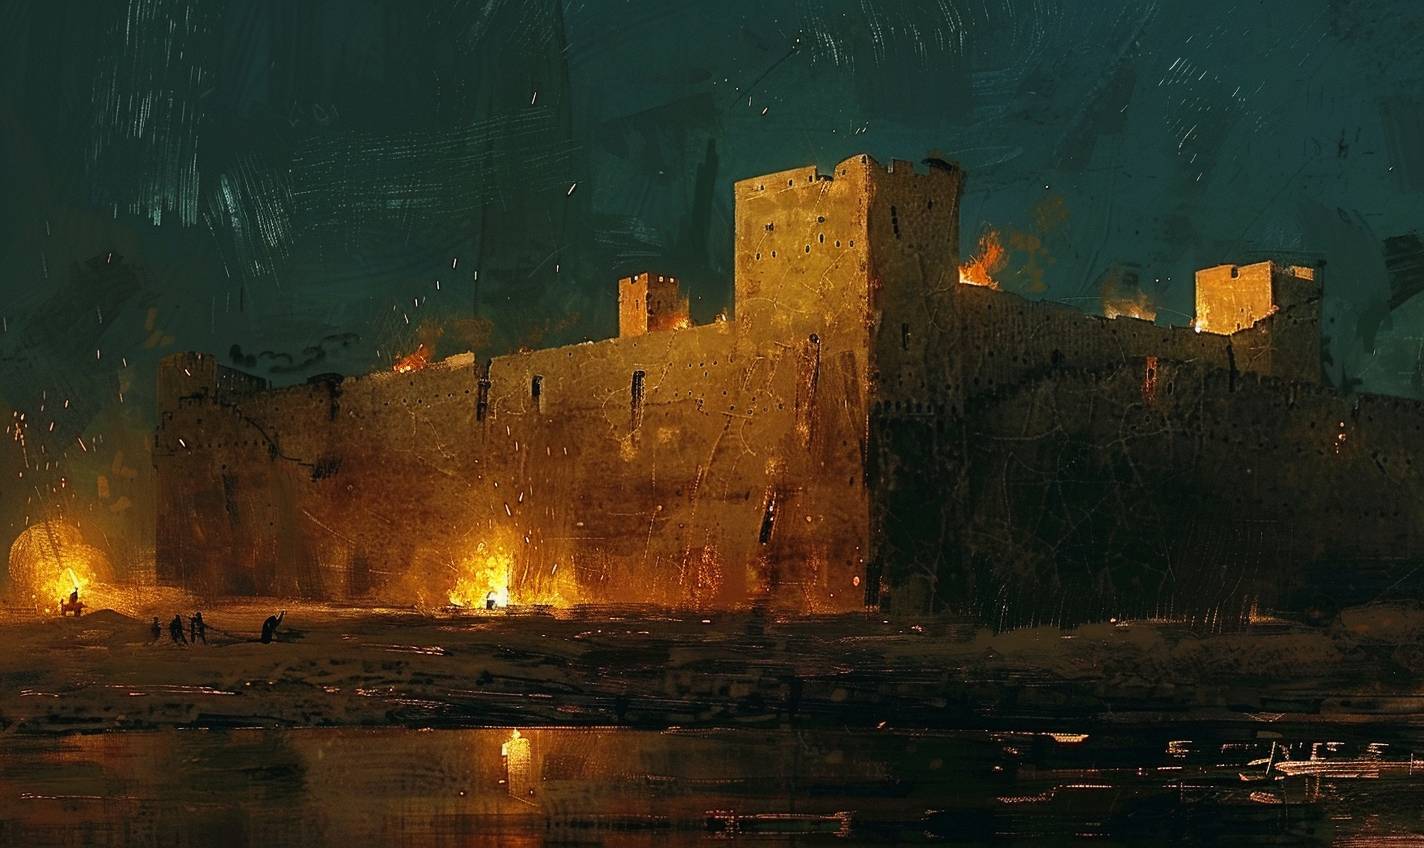 In the style of Andrew Wyeth, an ancient citadel lit by flickering torches